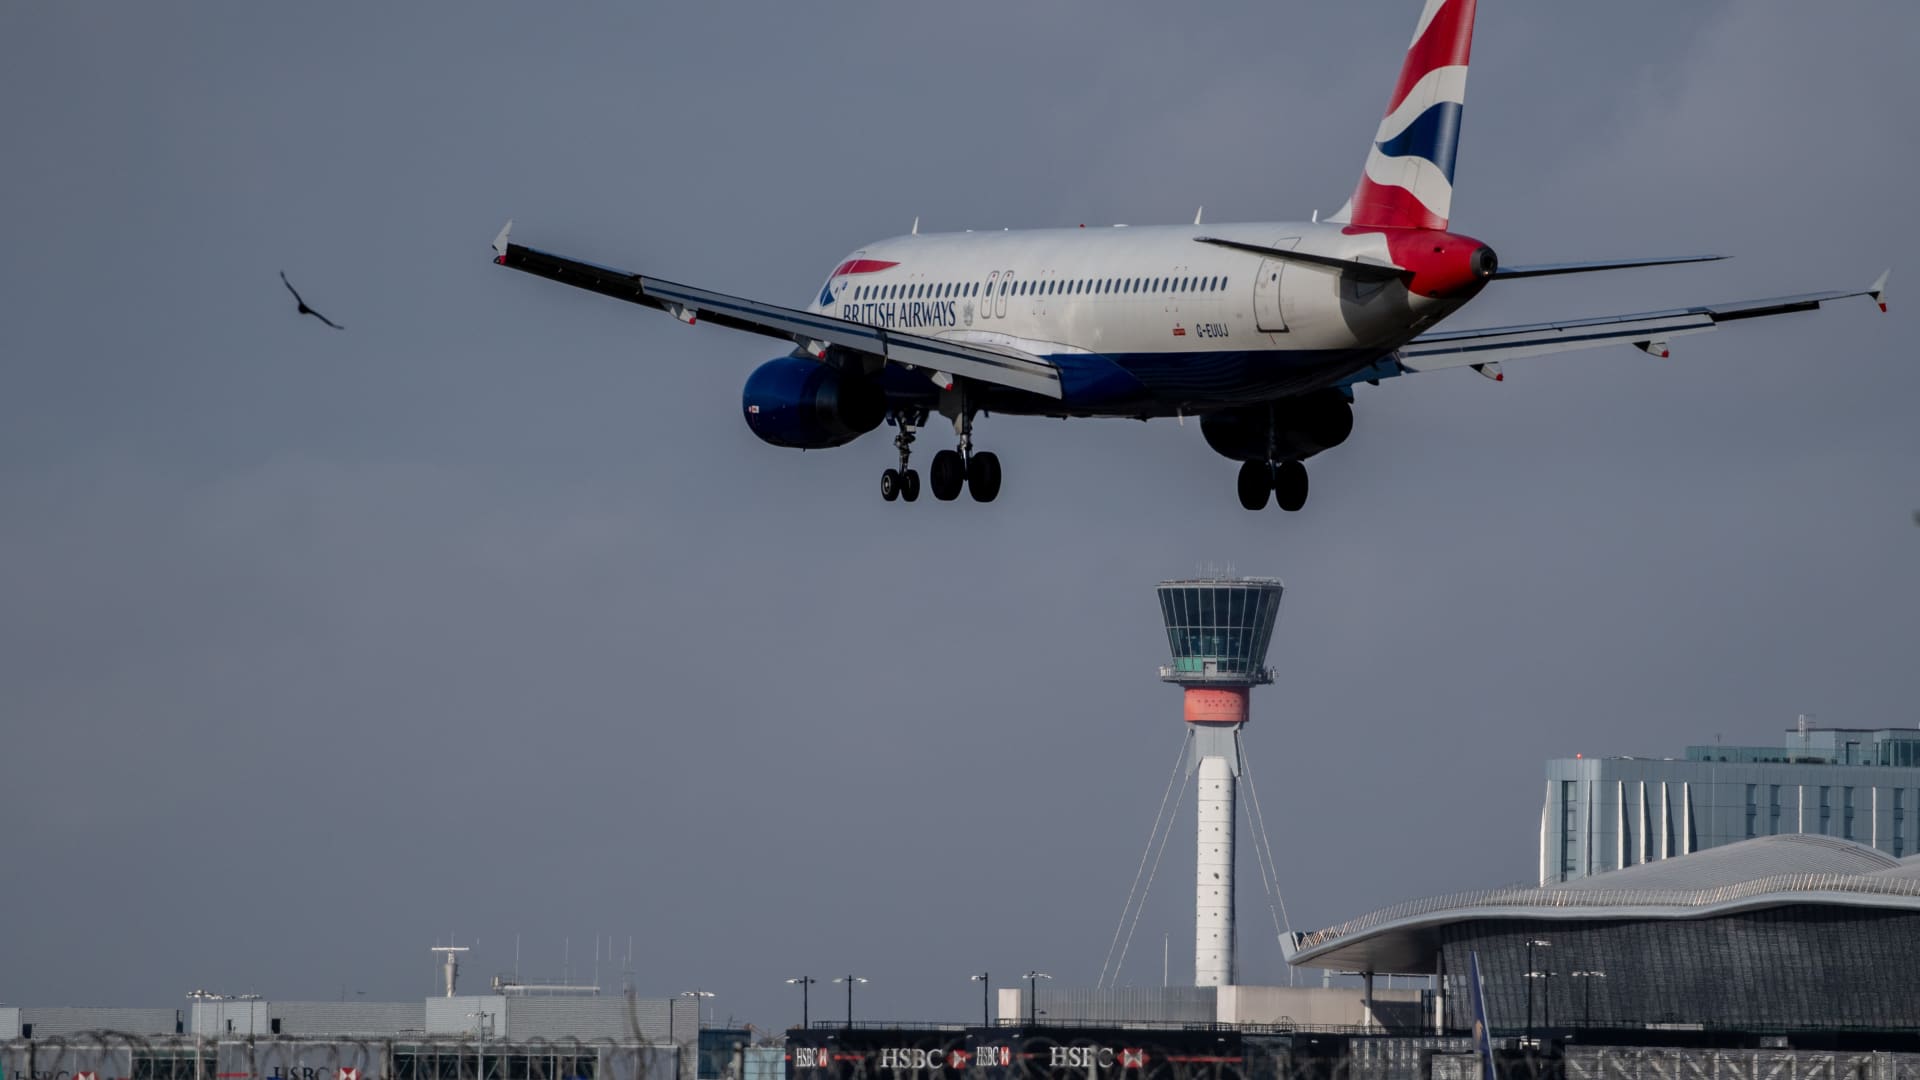 British Airways-owner IAG beats forecasts, mindful of uncertainty ahead